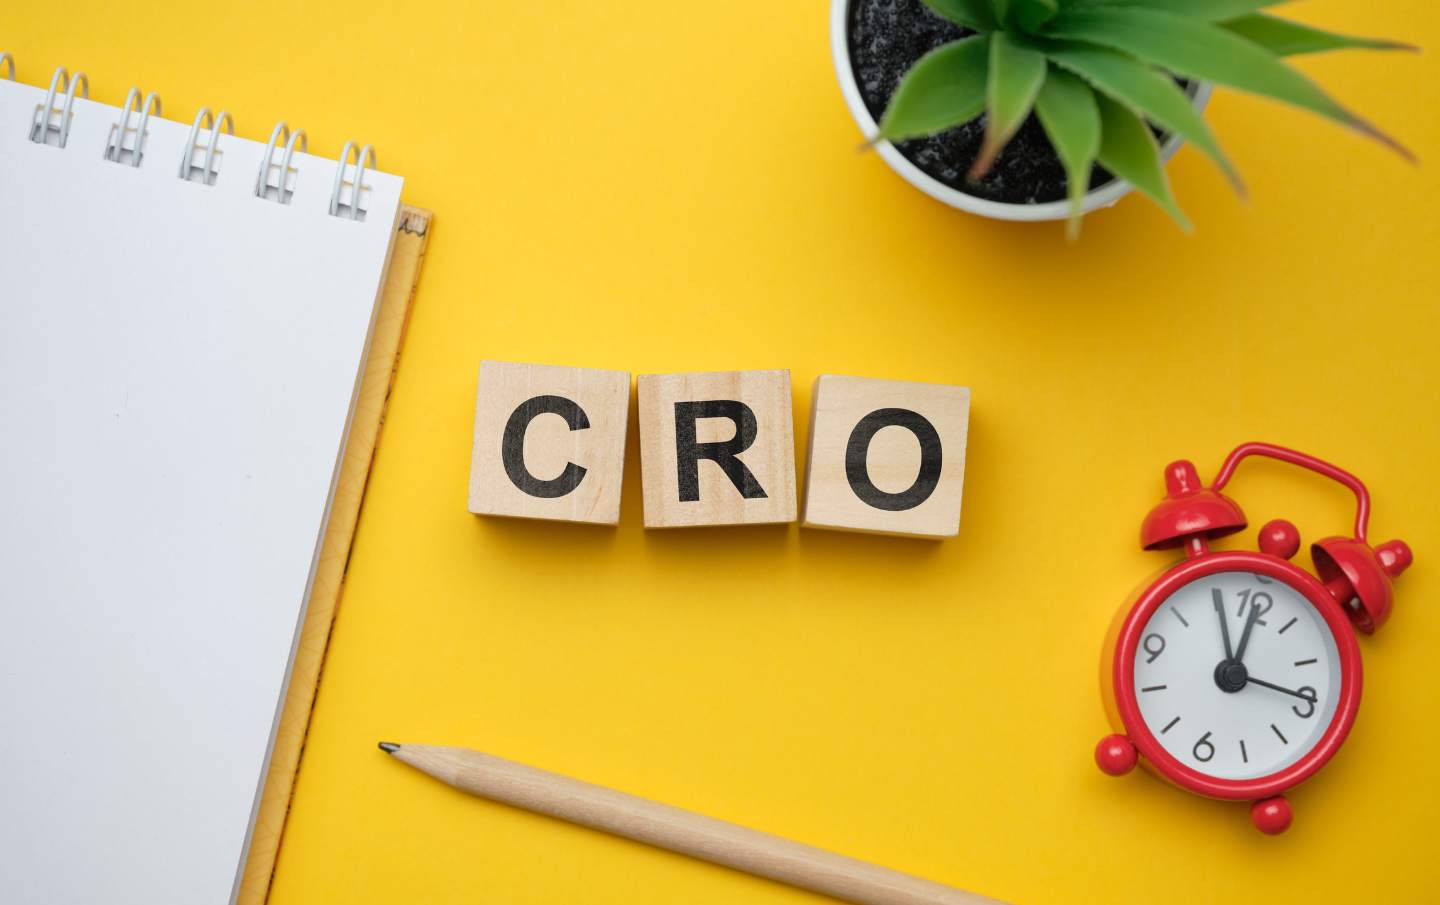 Wooden blocks spelling out C R and O for conversion rate optimisation surrounded by a notepad, pencil, desk plant and alarm clock, on a business owners yellow desk